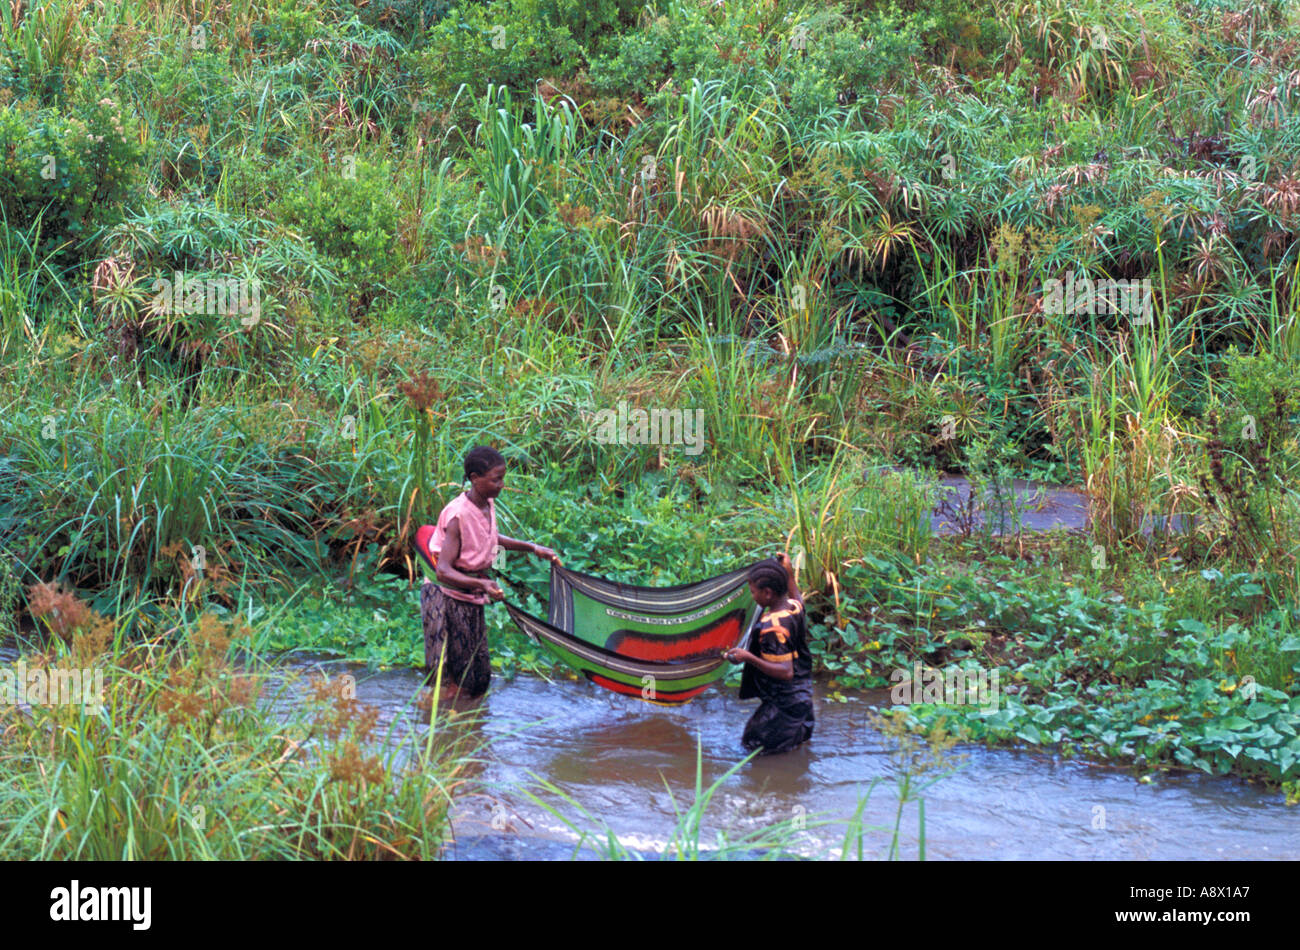 AFRICA KENYA Malindi Kenyan mother and daughter use a traditional kanga cloth as a net to capture fish in the river Stock Photo